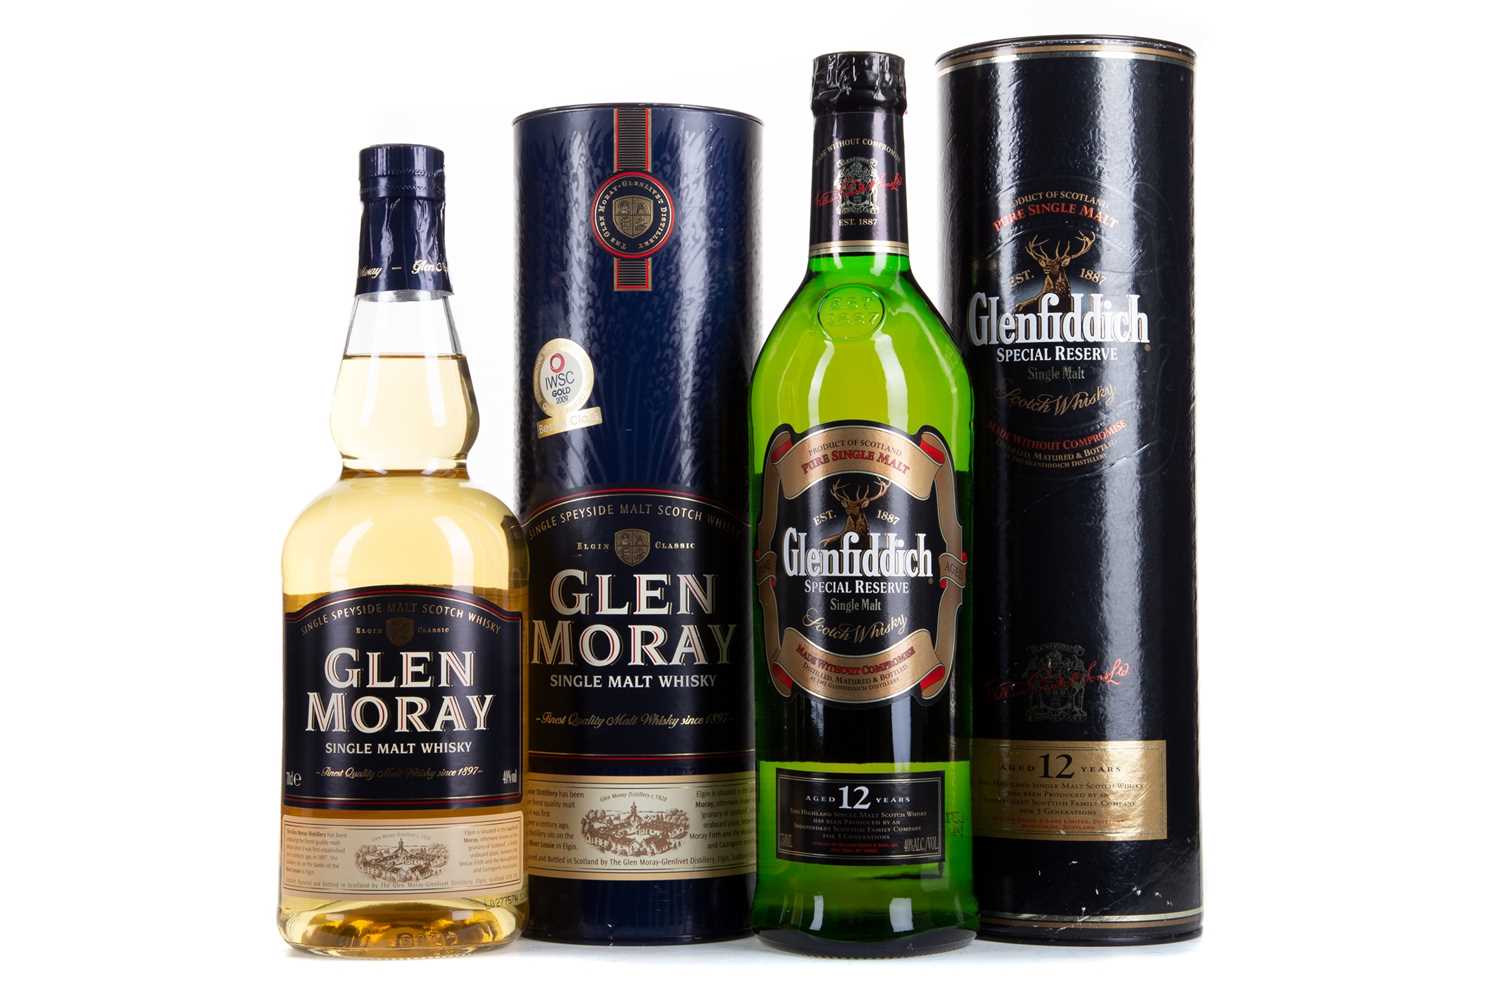 Lot 61 - GLENFIDDICH 12 YEAR OLD SPECIAL RESERVE 75CL AND GLEN MORAY SINGLE MALT